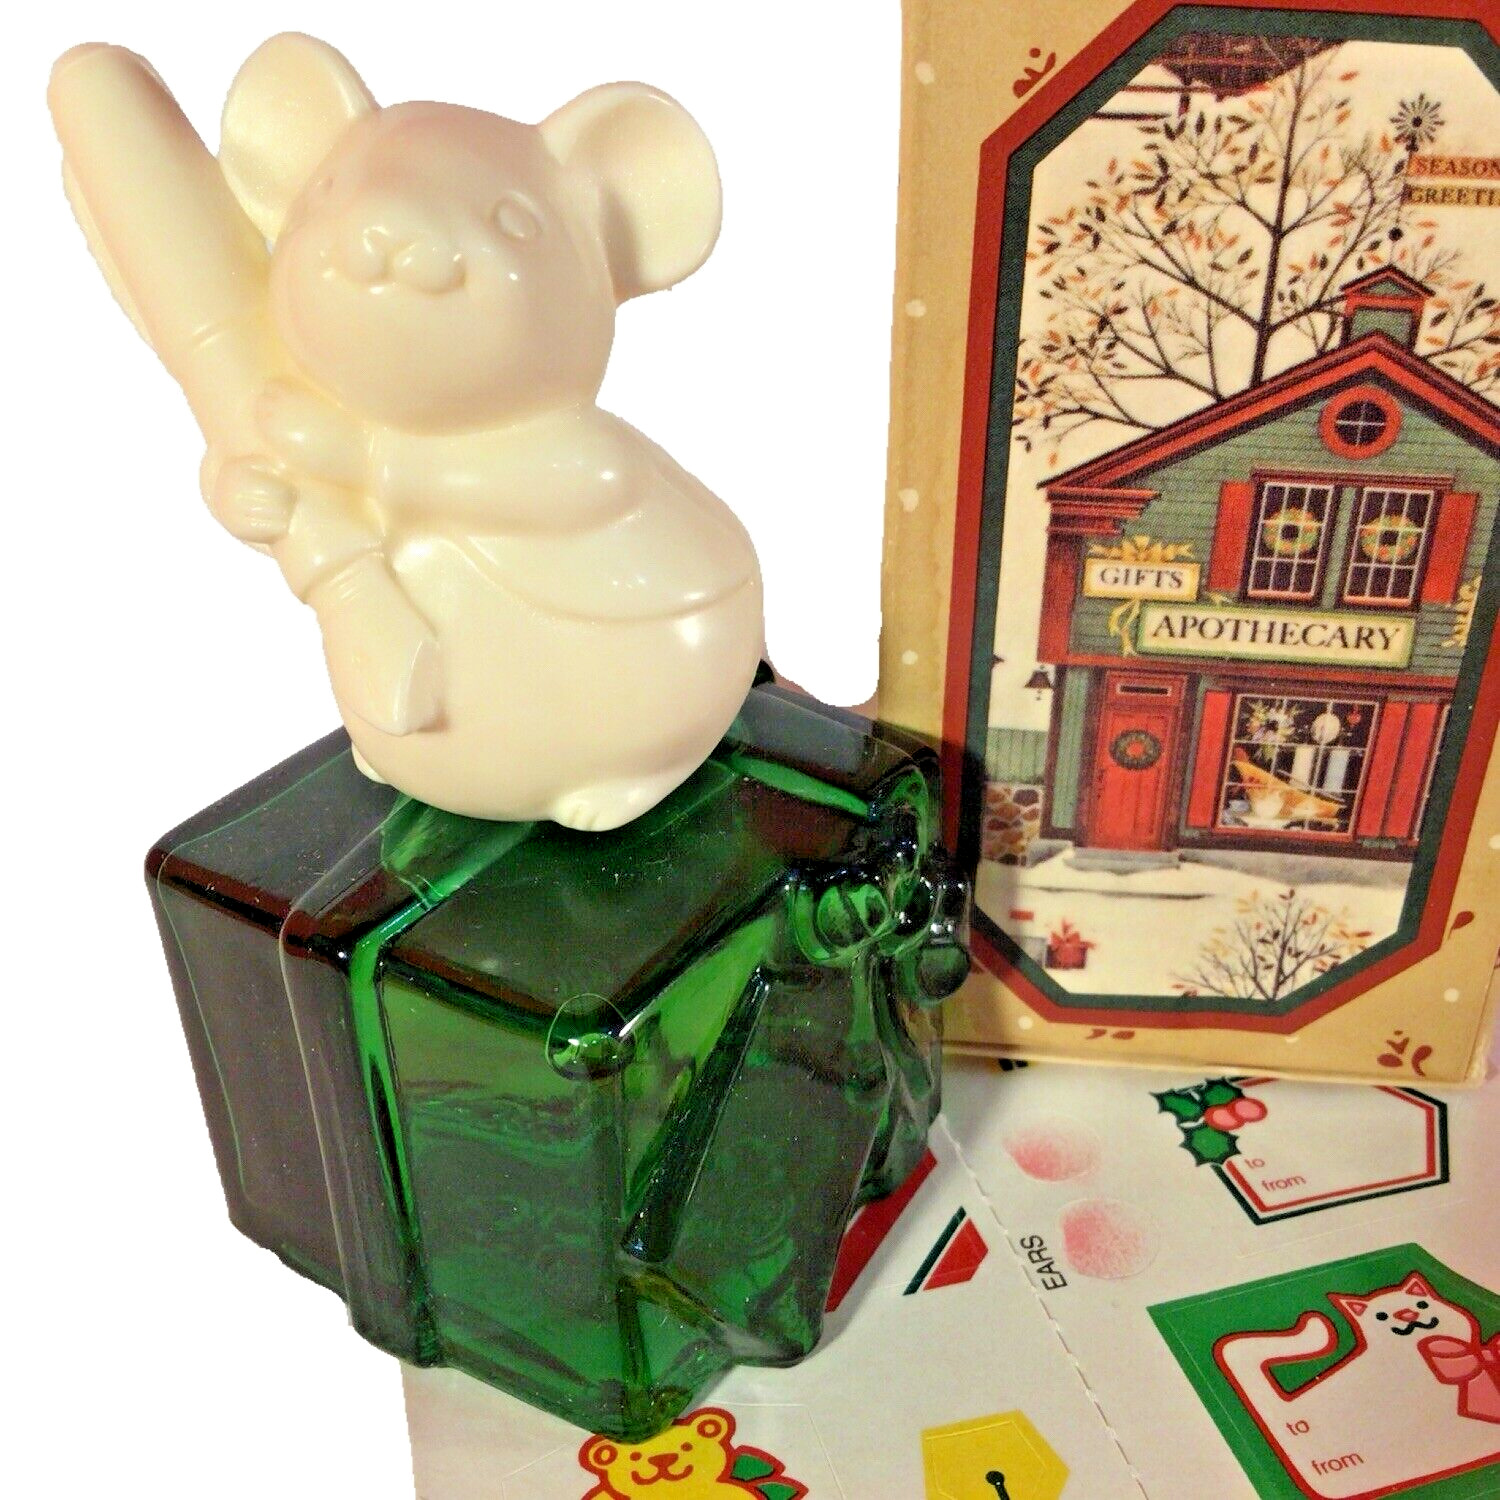 COUNTRY CHRISTMAS MOUSE AVON DECANTER WITH CHARISMA COLOGNE IN BOX 1982 VINTAGE